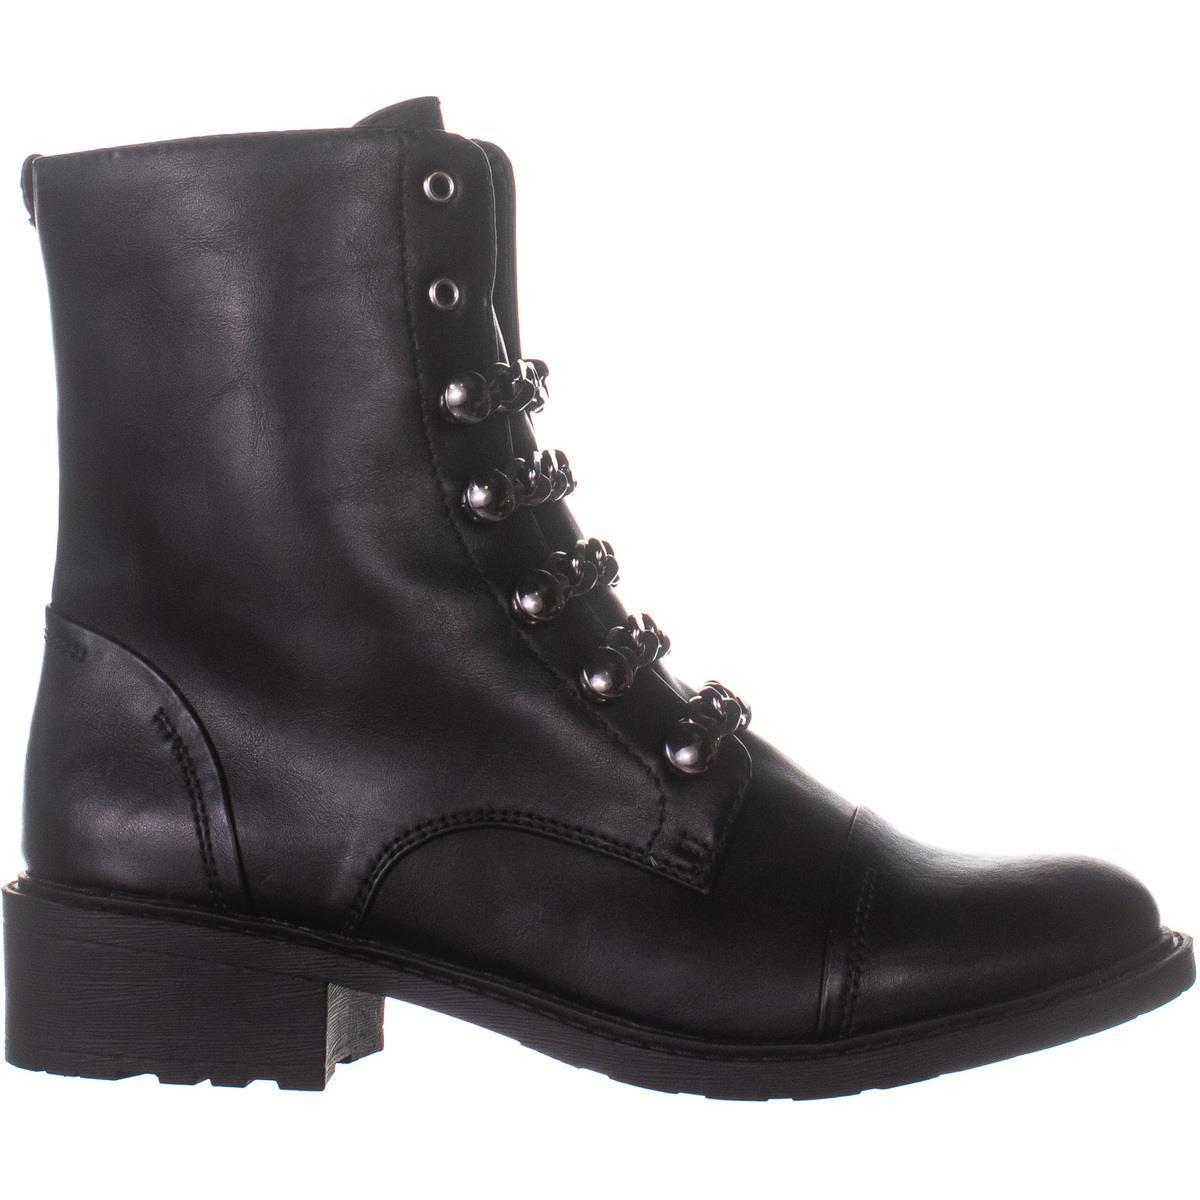 Circus by Sam Edelman Dacey Combat Boots, Black, 7.5 US - Boots